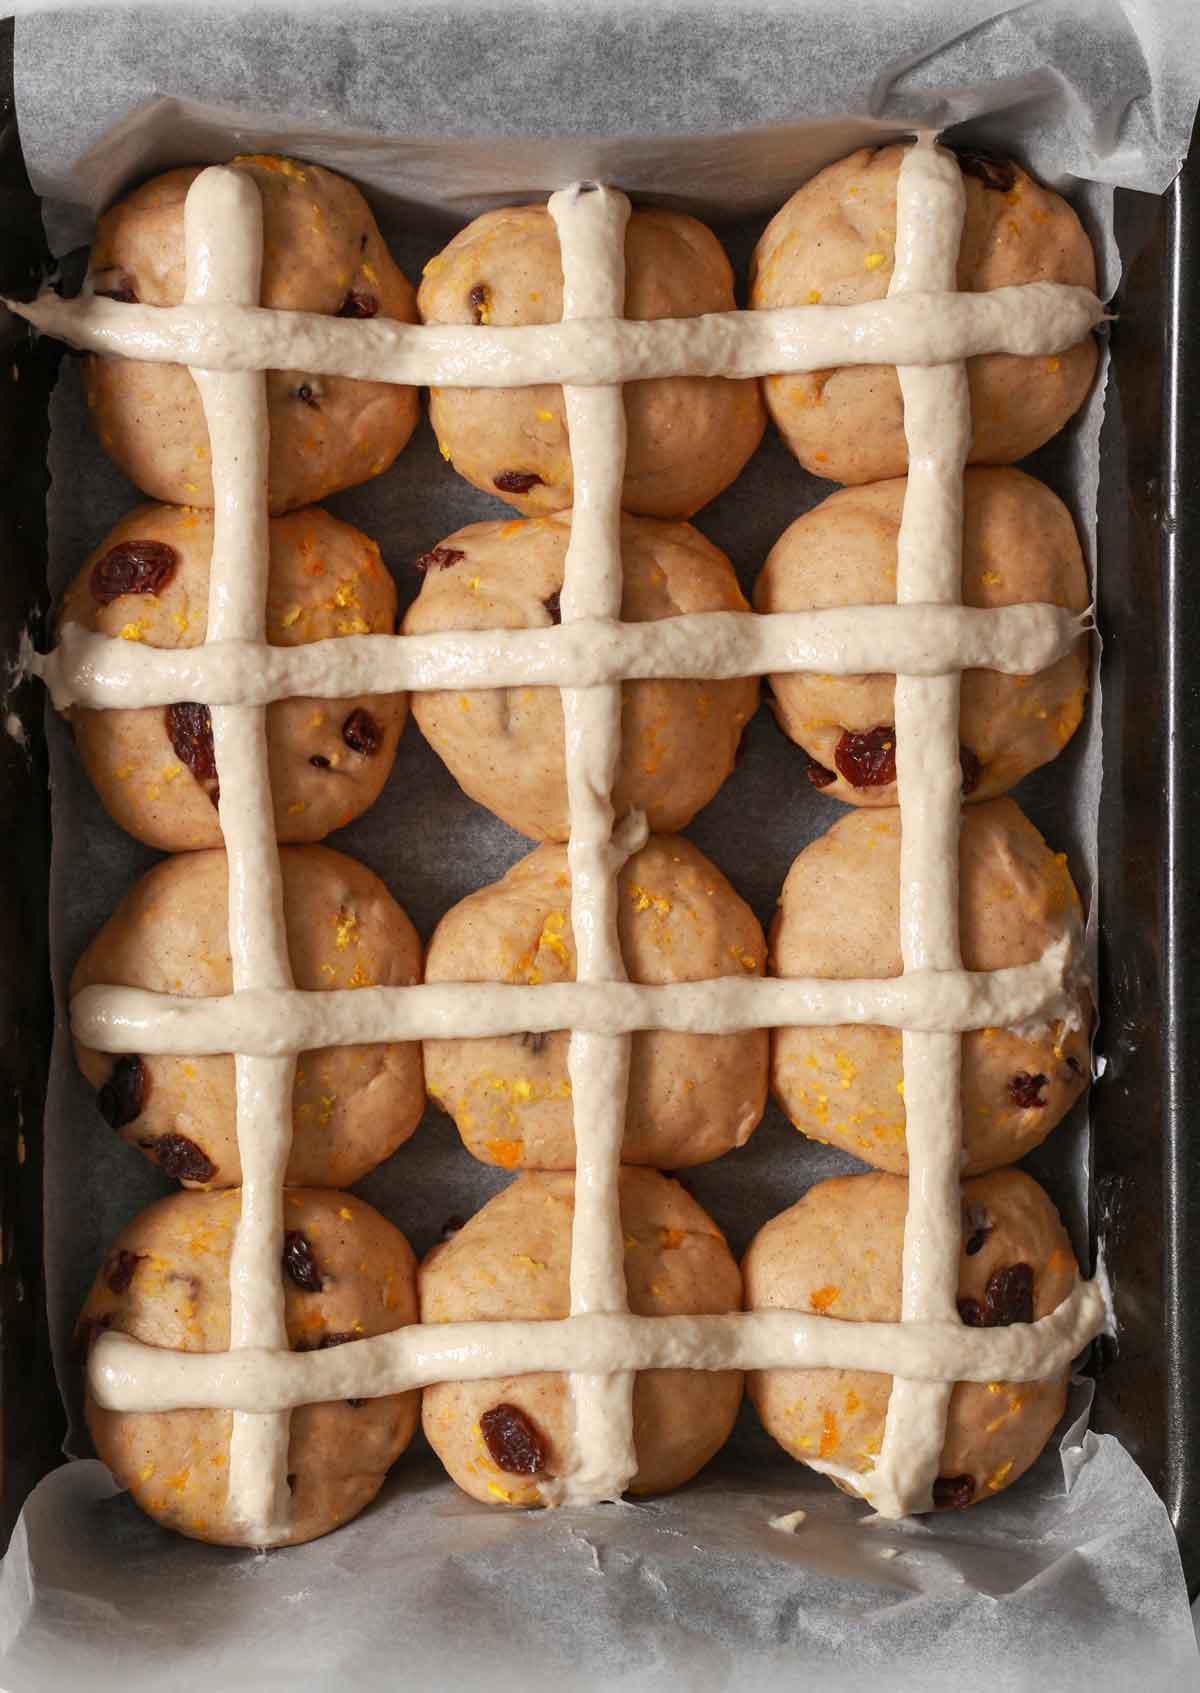 Crosses Piped Onto Hot Cross Buns Before Baking